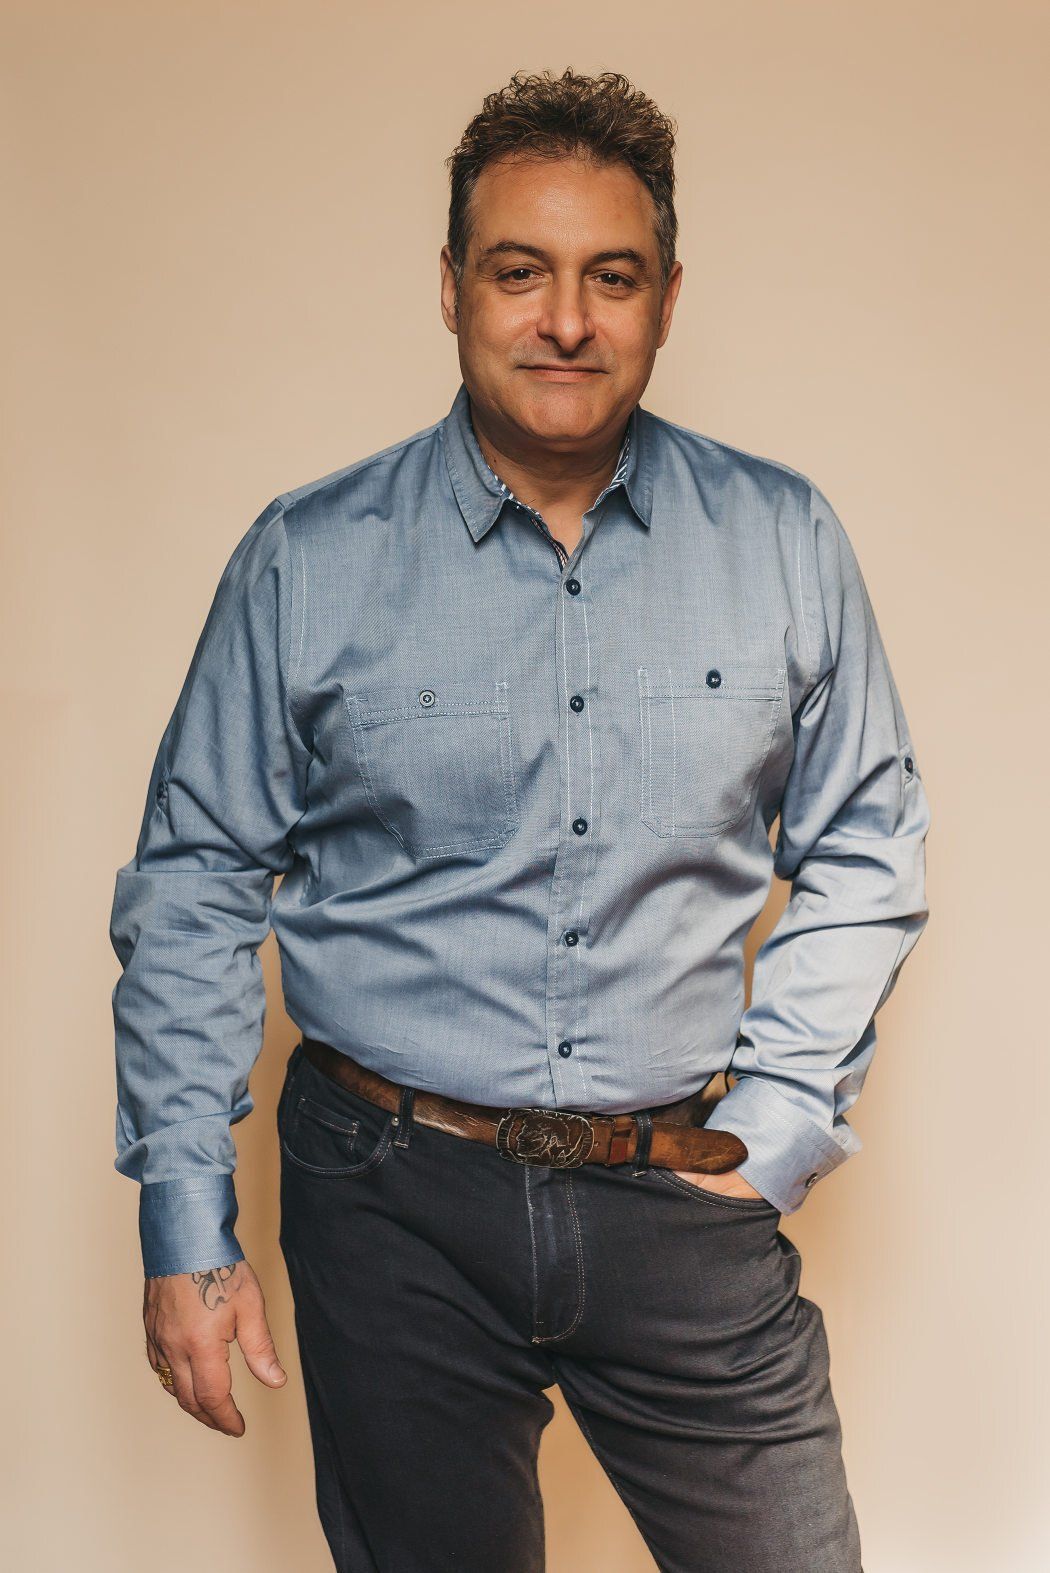 A male business owner standing with one hand in front jean pocket in a professional headshot photograph